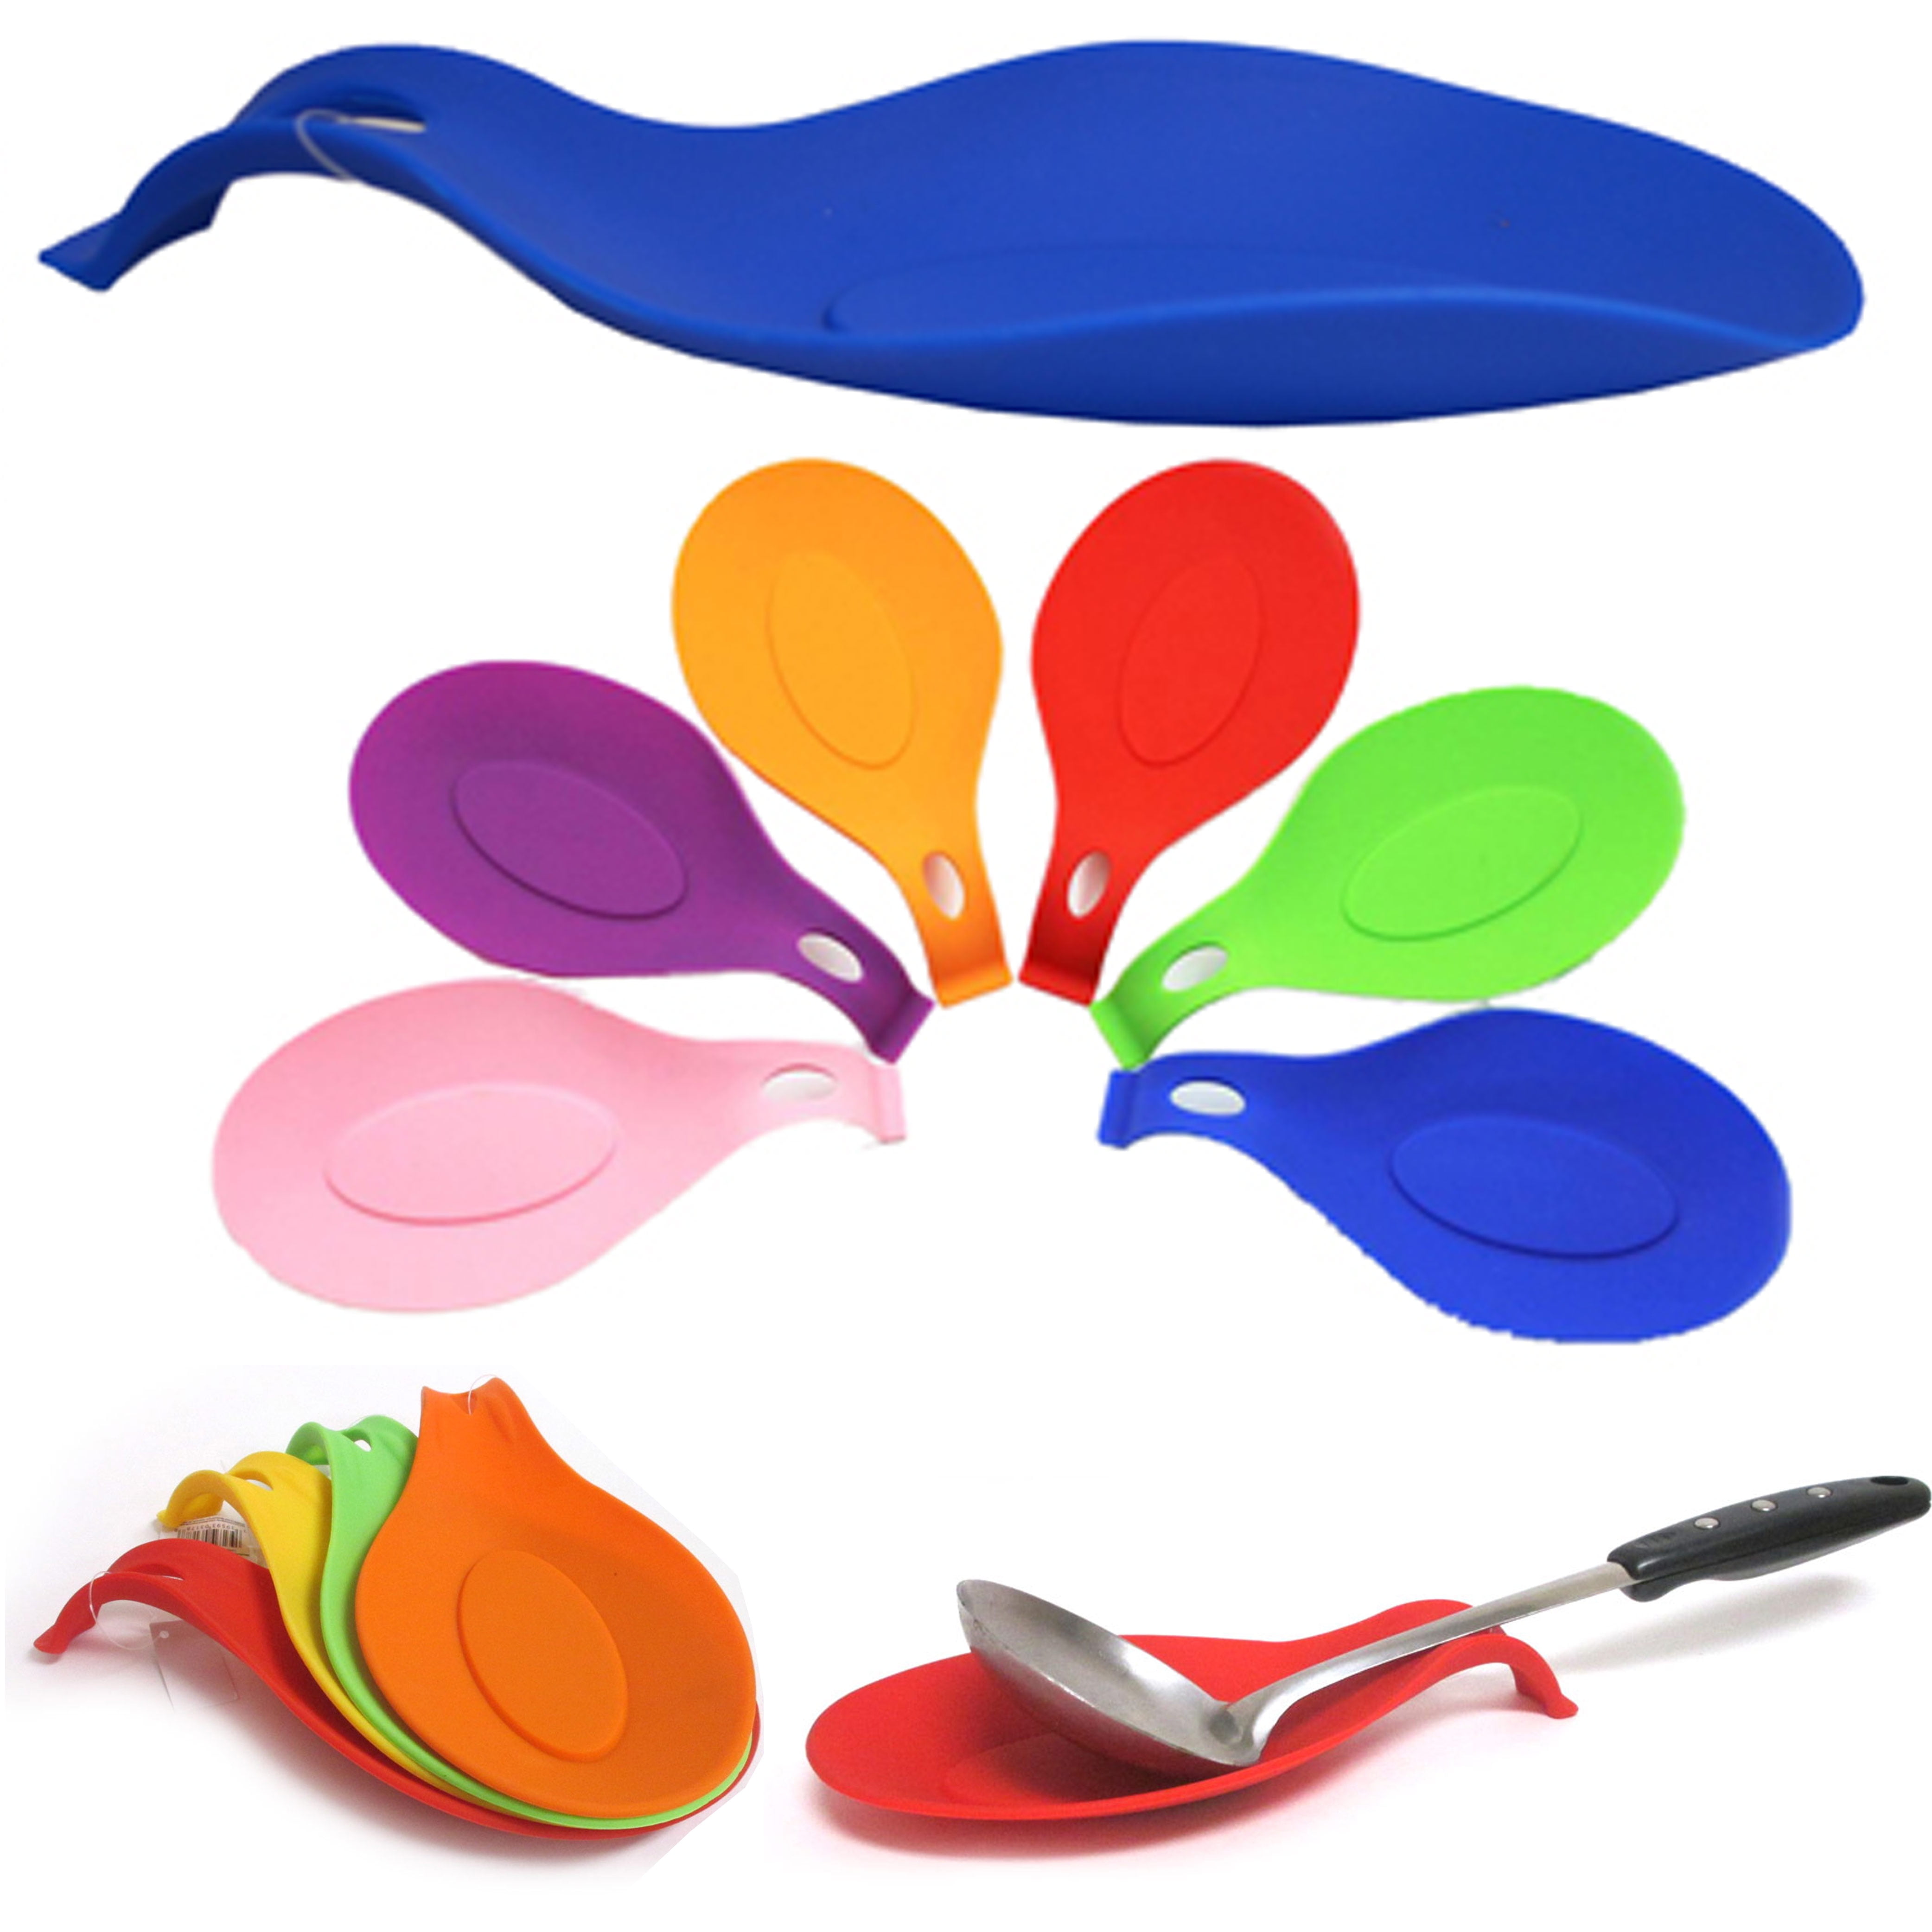 Ramdom Color UPKOCH 4pcs Kitchen Silicone Spoon Rest Flexible Almond-Shaped Silicone Kitchen Utensil Rest Ladle Spoon Holder 